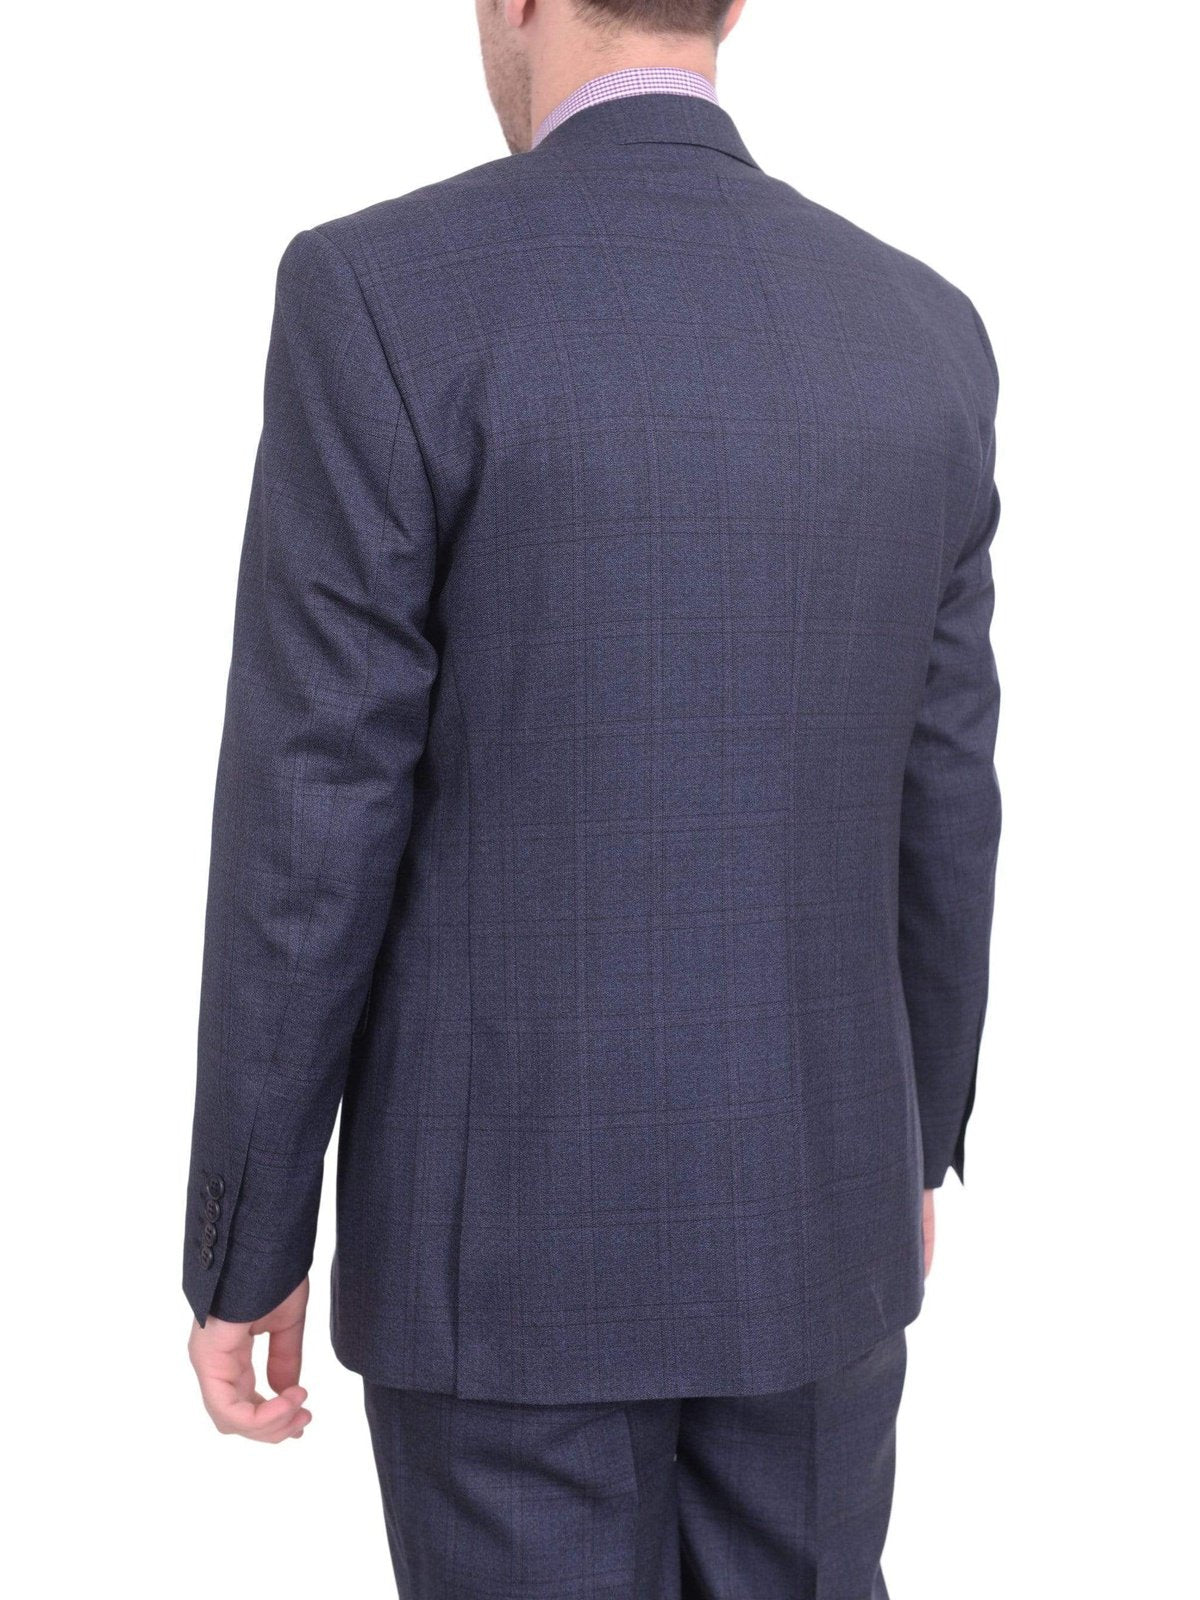 London Fog TWO PIECE SUITS Mens Slim Fit Blue With Purple Windowpane Two Button Wool Suit